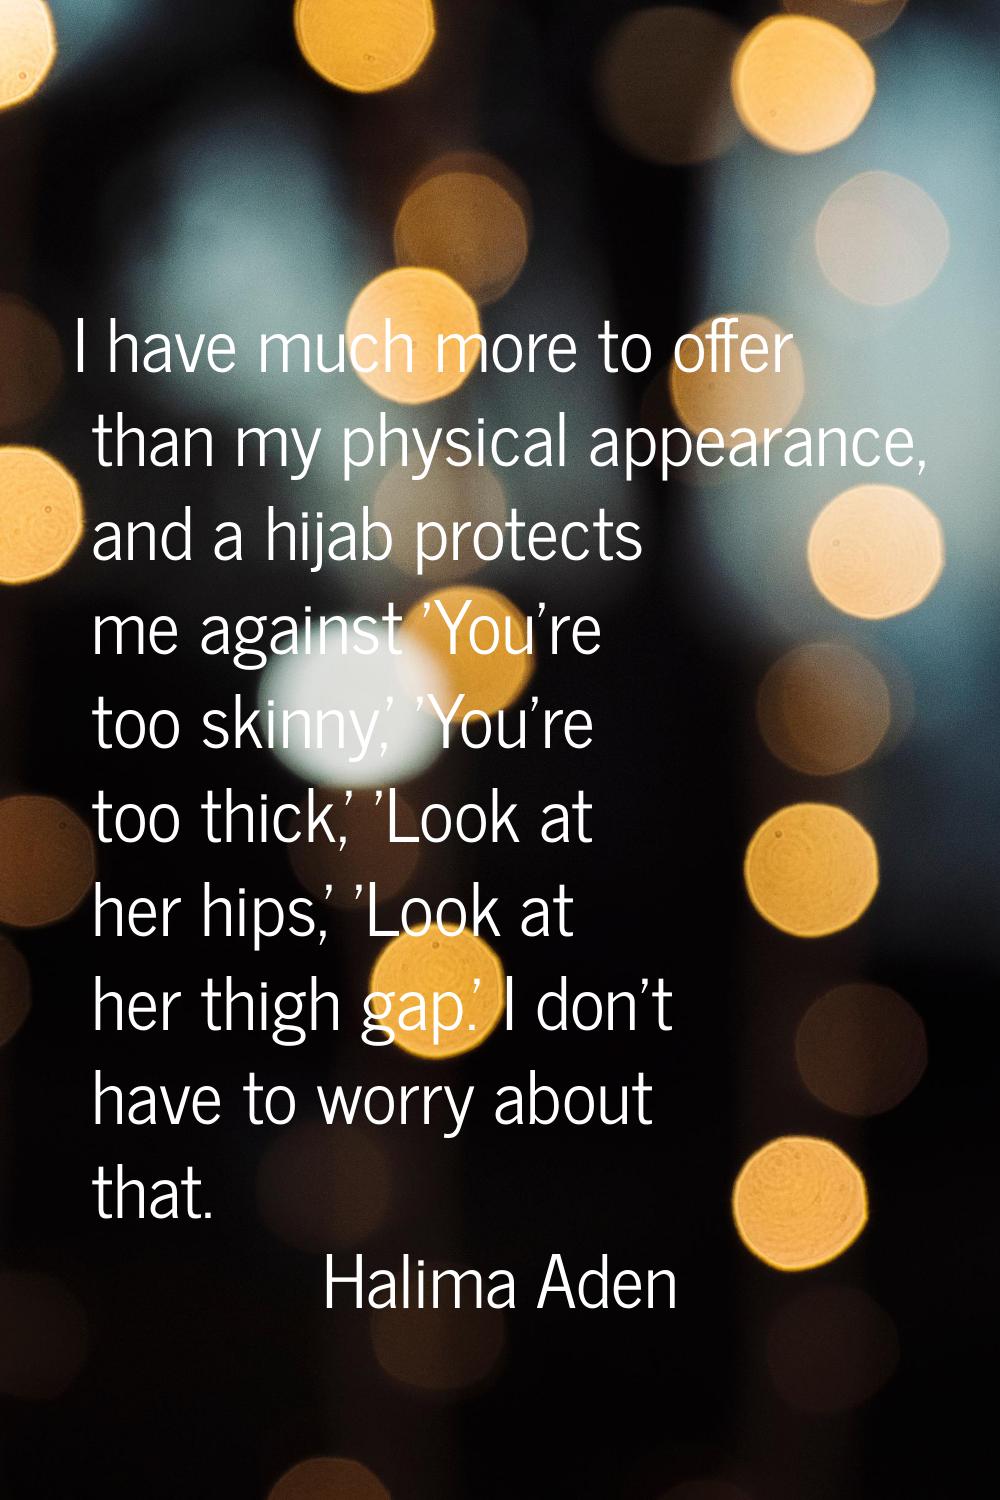 I have much more to offer than my physical appearance, and a hijab protects me against 'You're too 